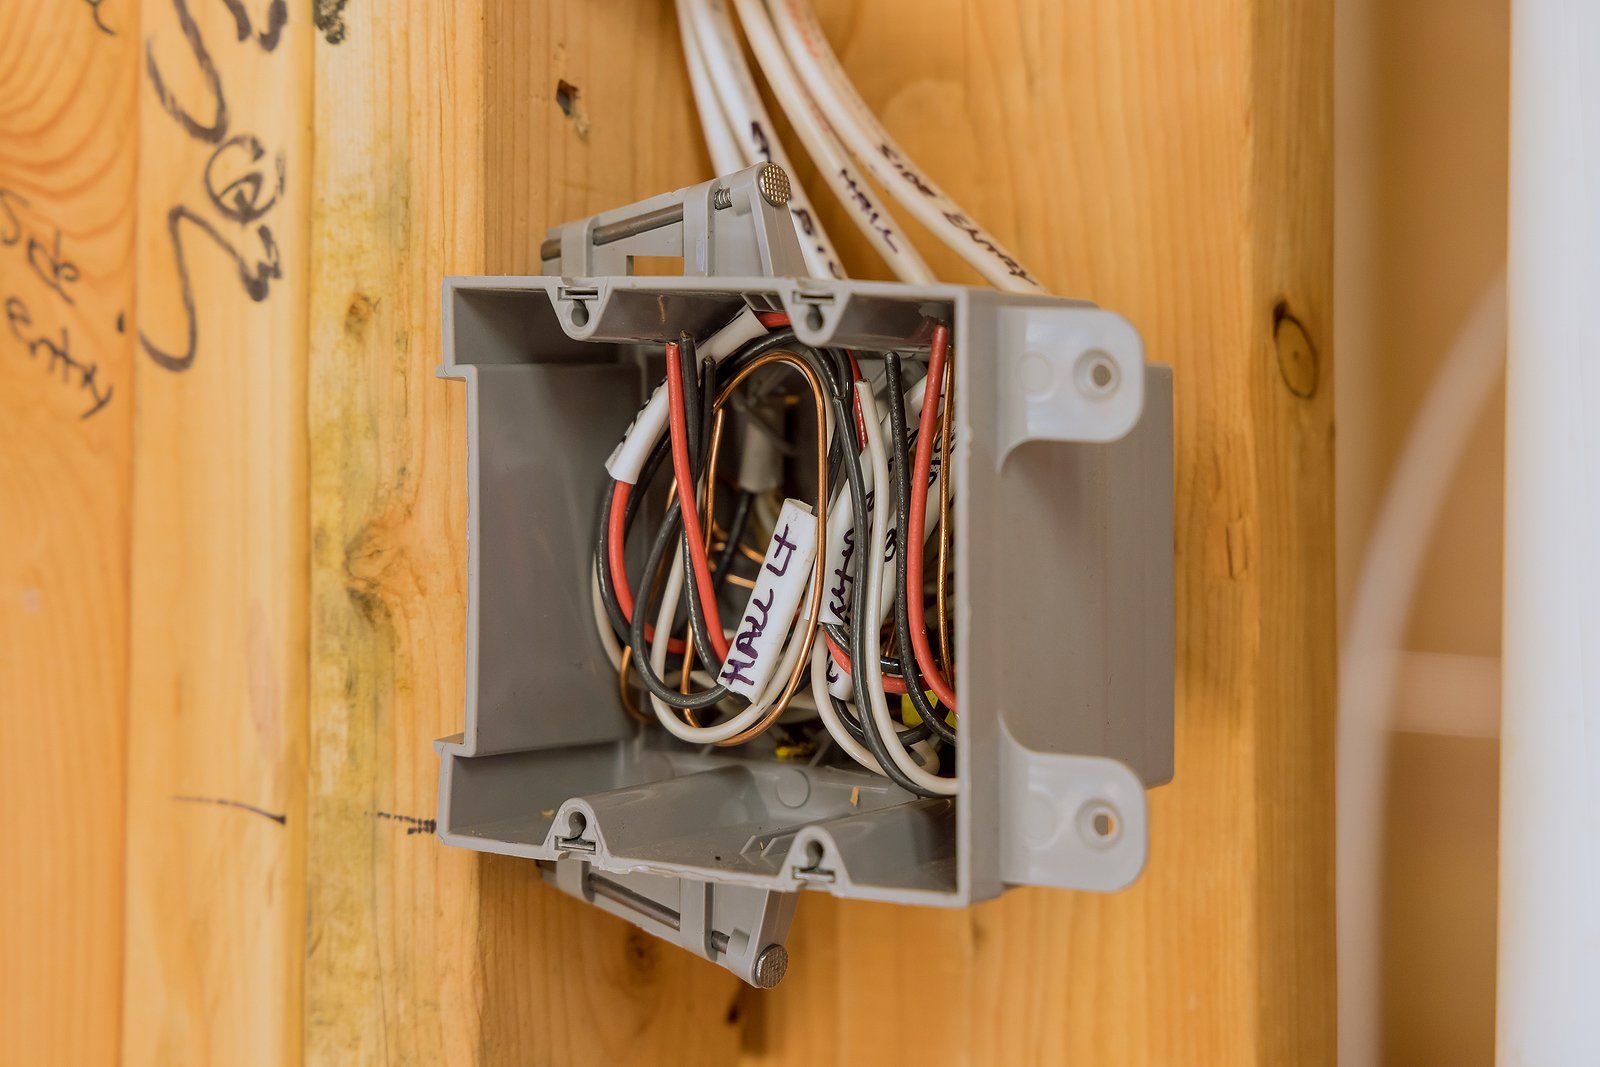 Most Trusted Home Electrical Repair Services in McAllen, TX